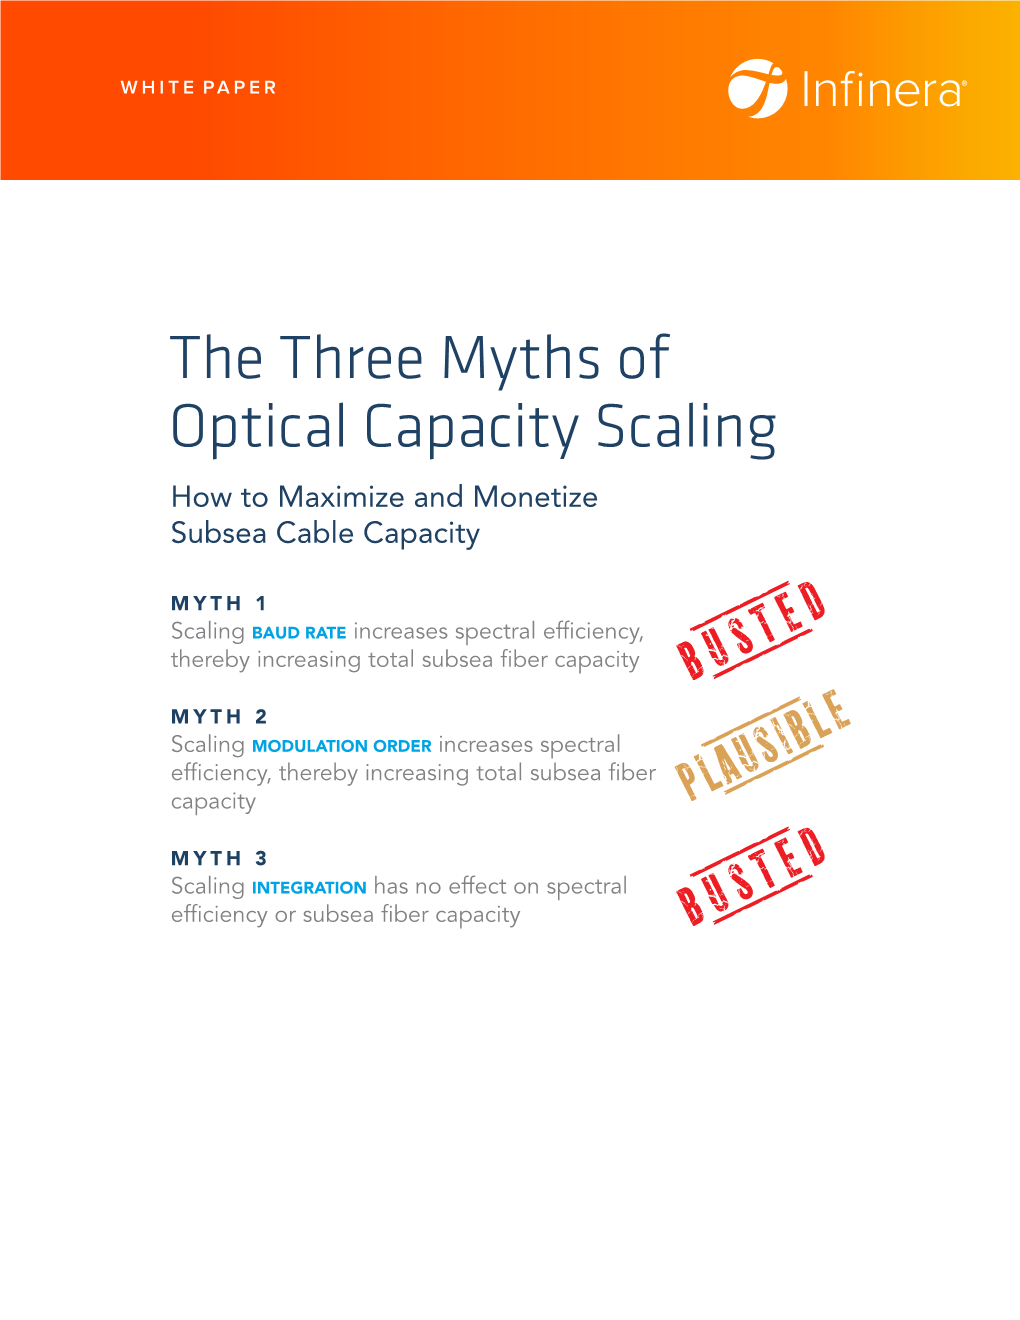 The Three Myths of Optical Capacity Scaling How to Maximize and Monetize Subsea Cable Capacity